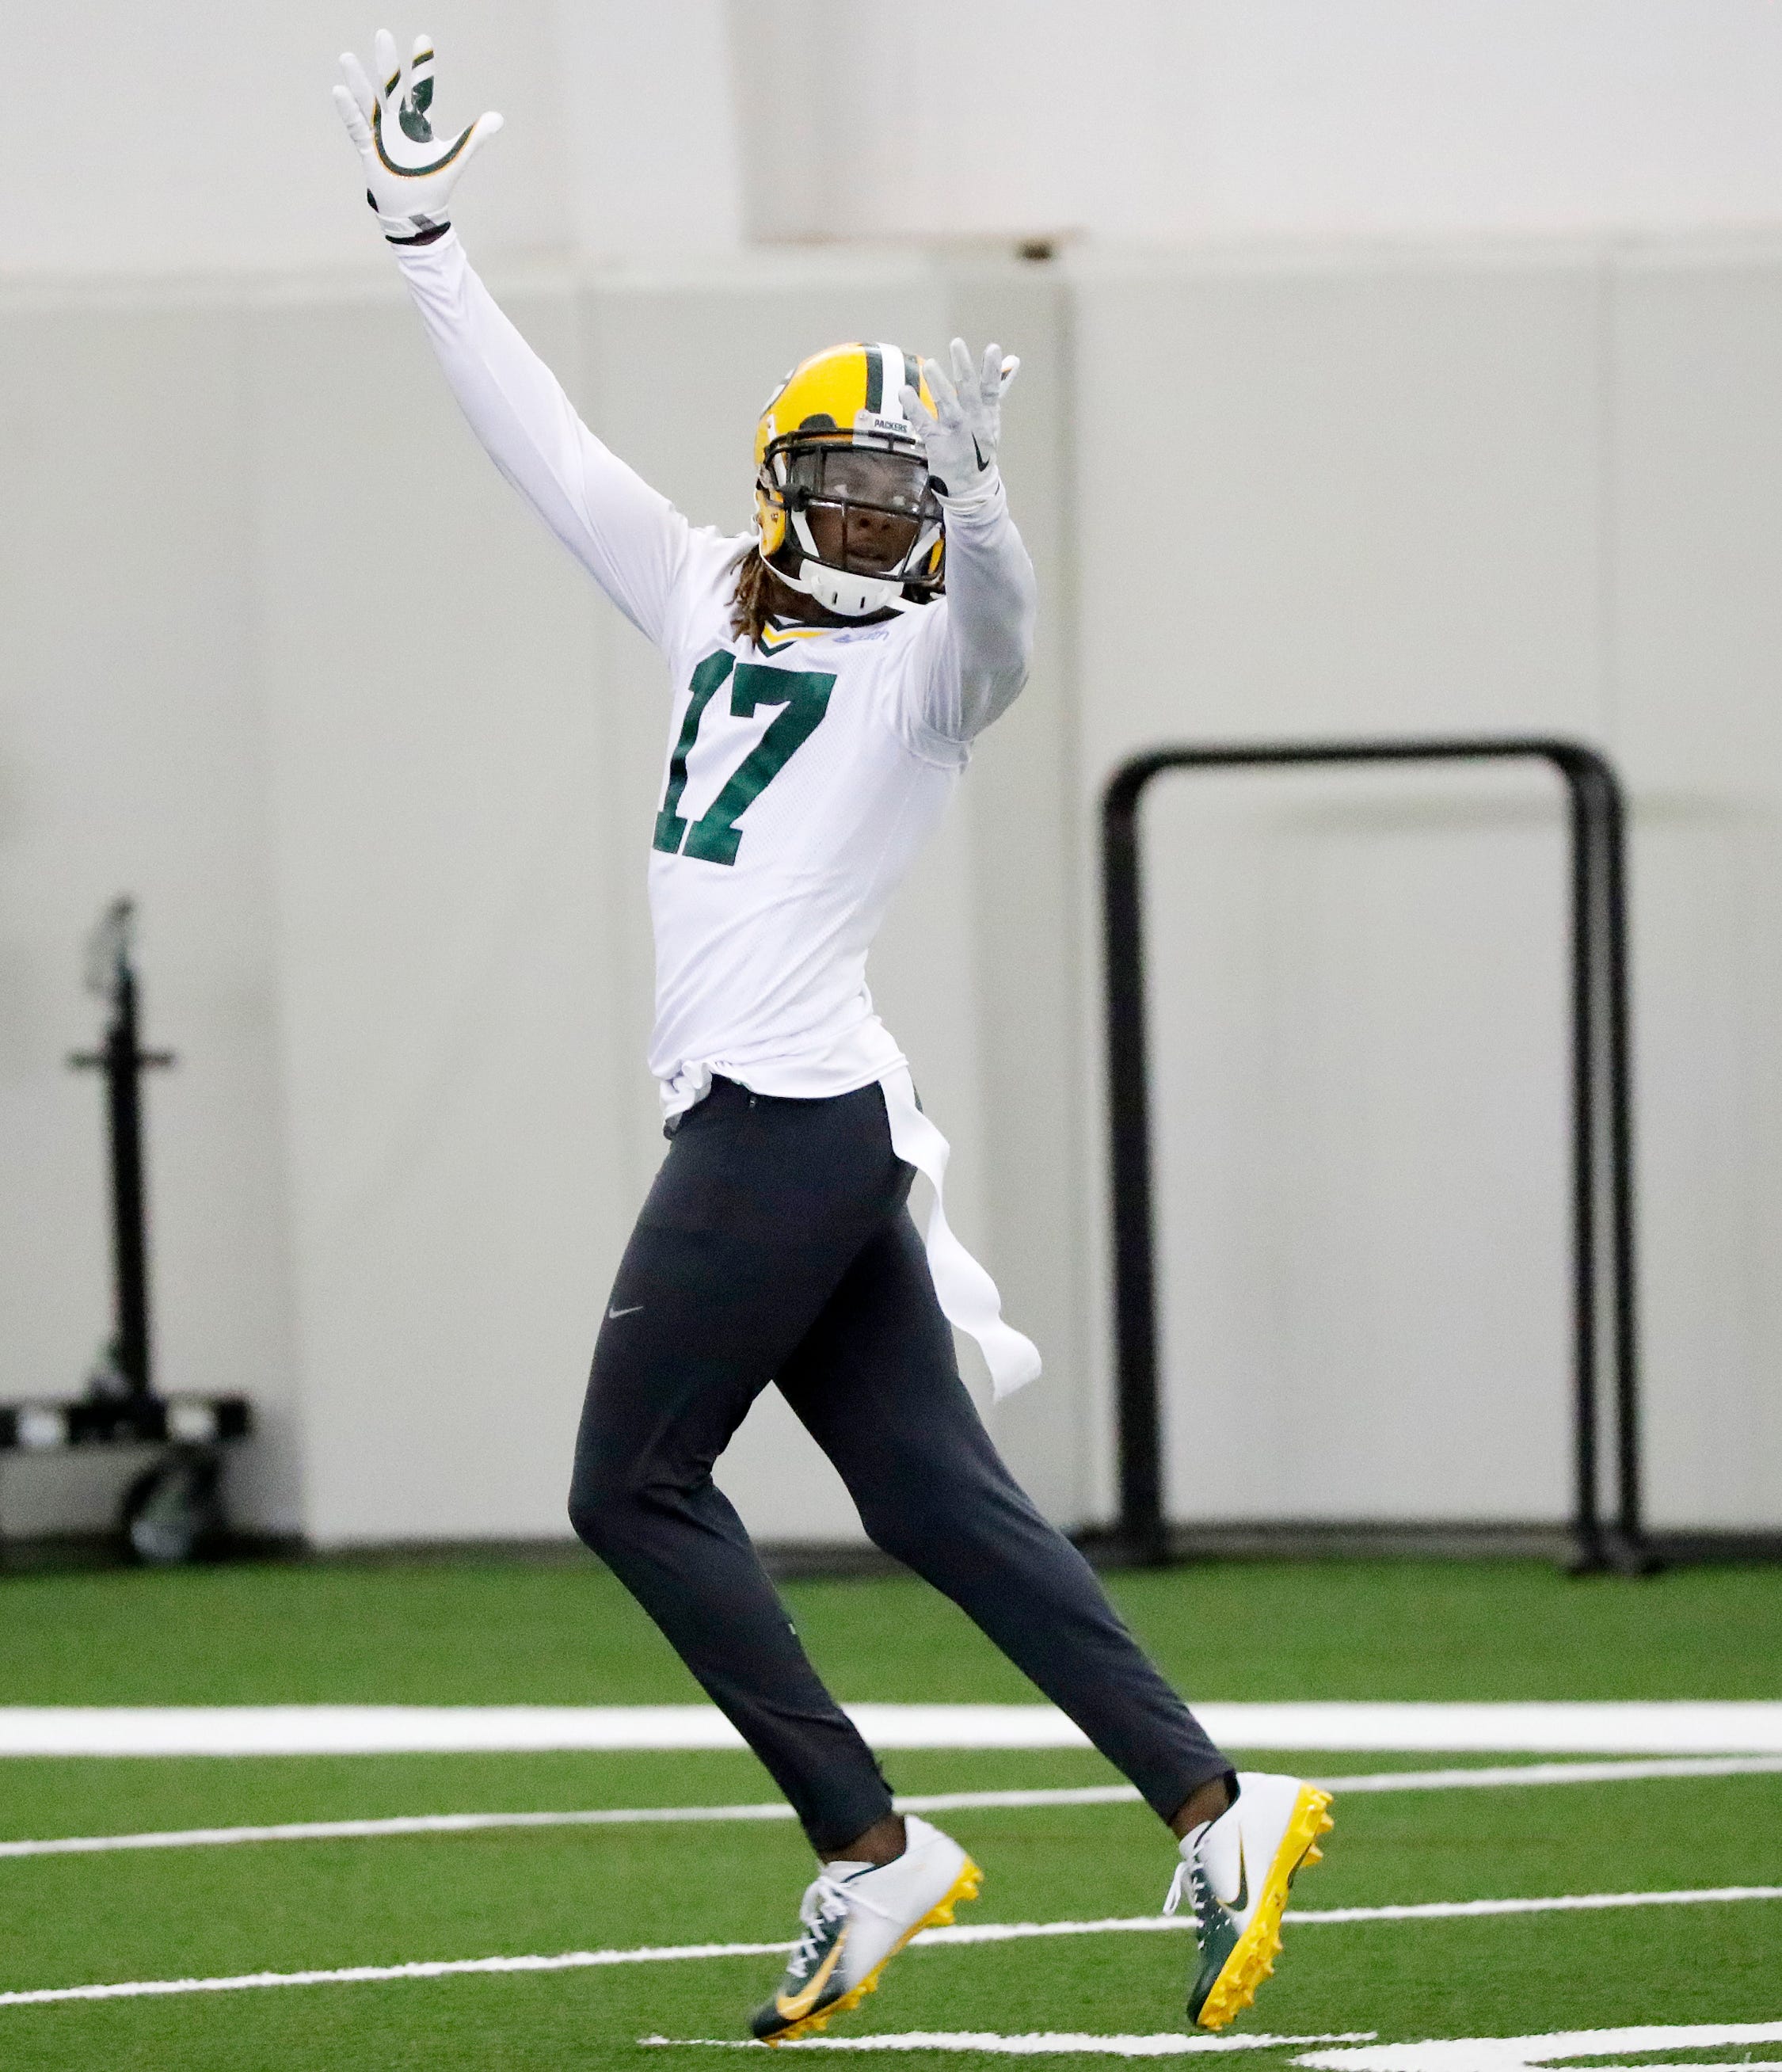 Green Bay Packers wide receiver Davante Adams (17) during a team practice at the Don Hutson Center on Wednesday, April 24, 2019 in Ashwaubenon, Wis.